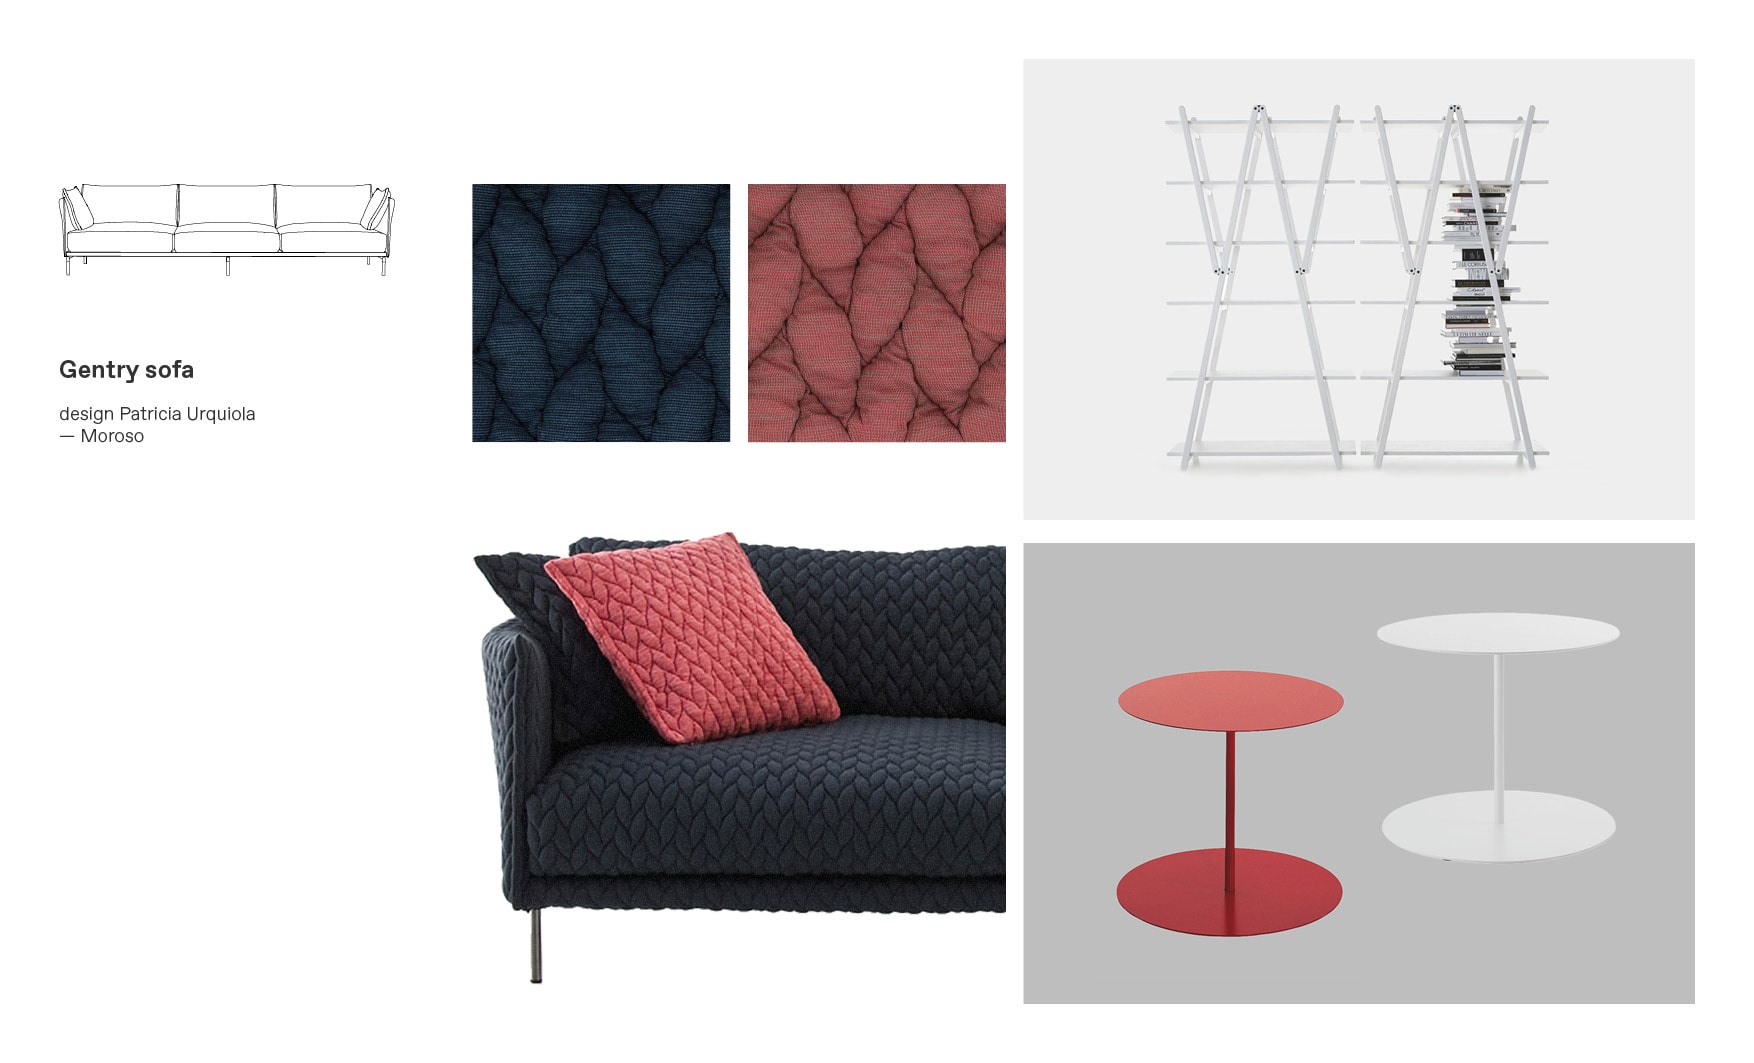 Moroso sofas and Gentry moodboard composition